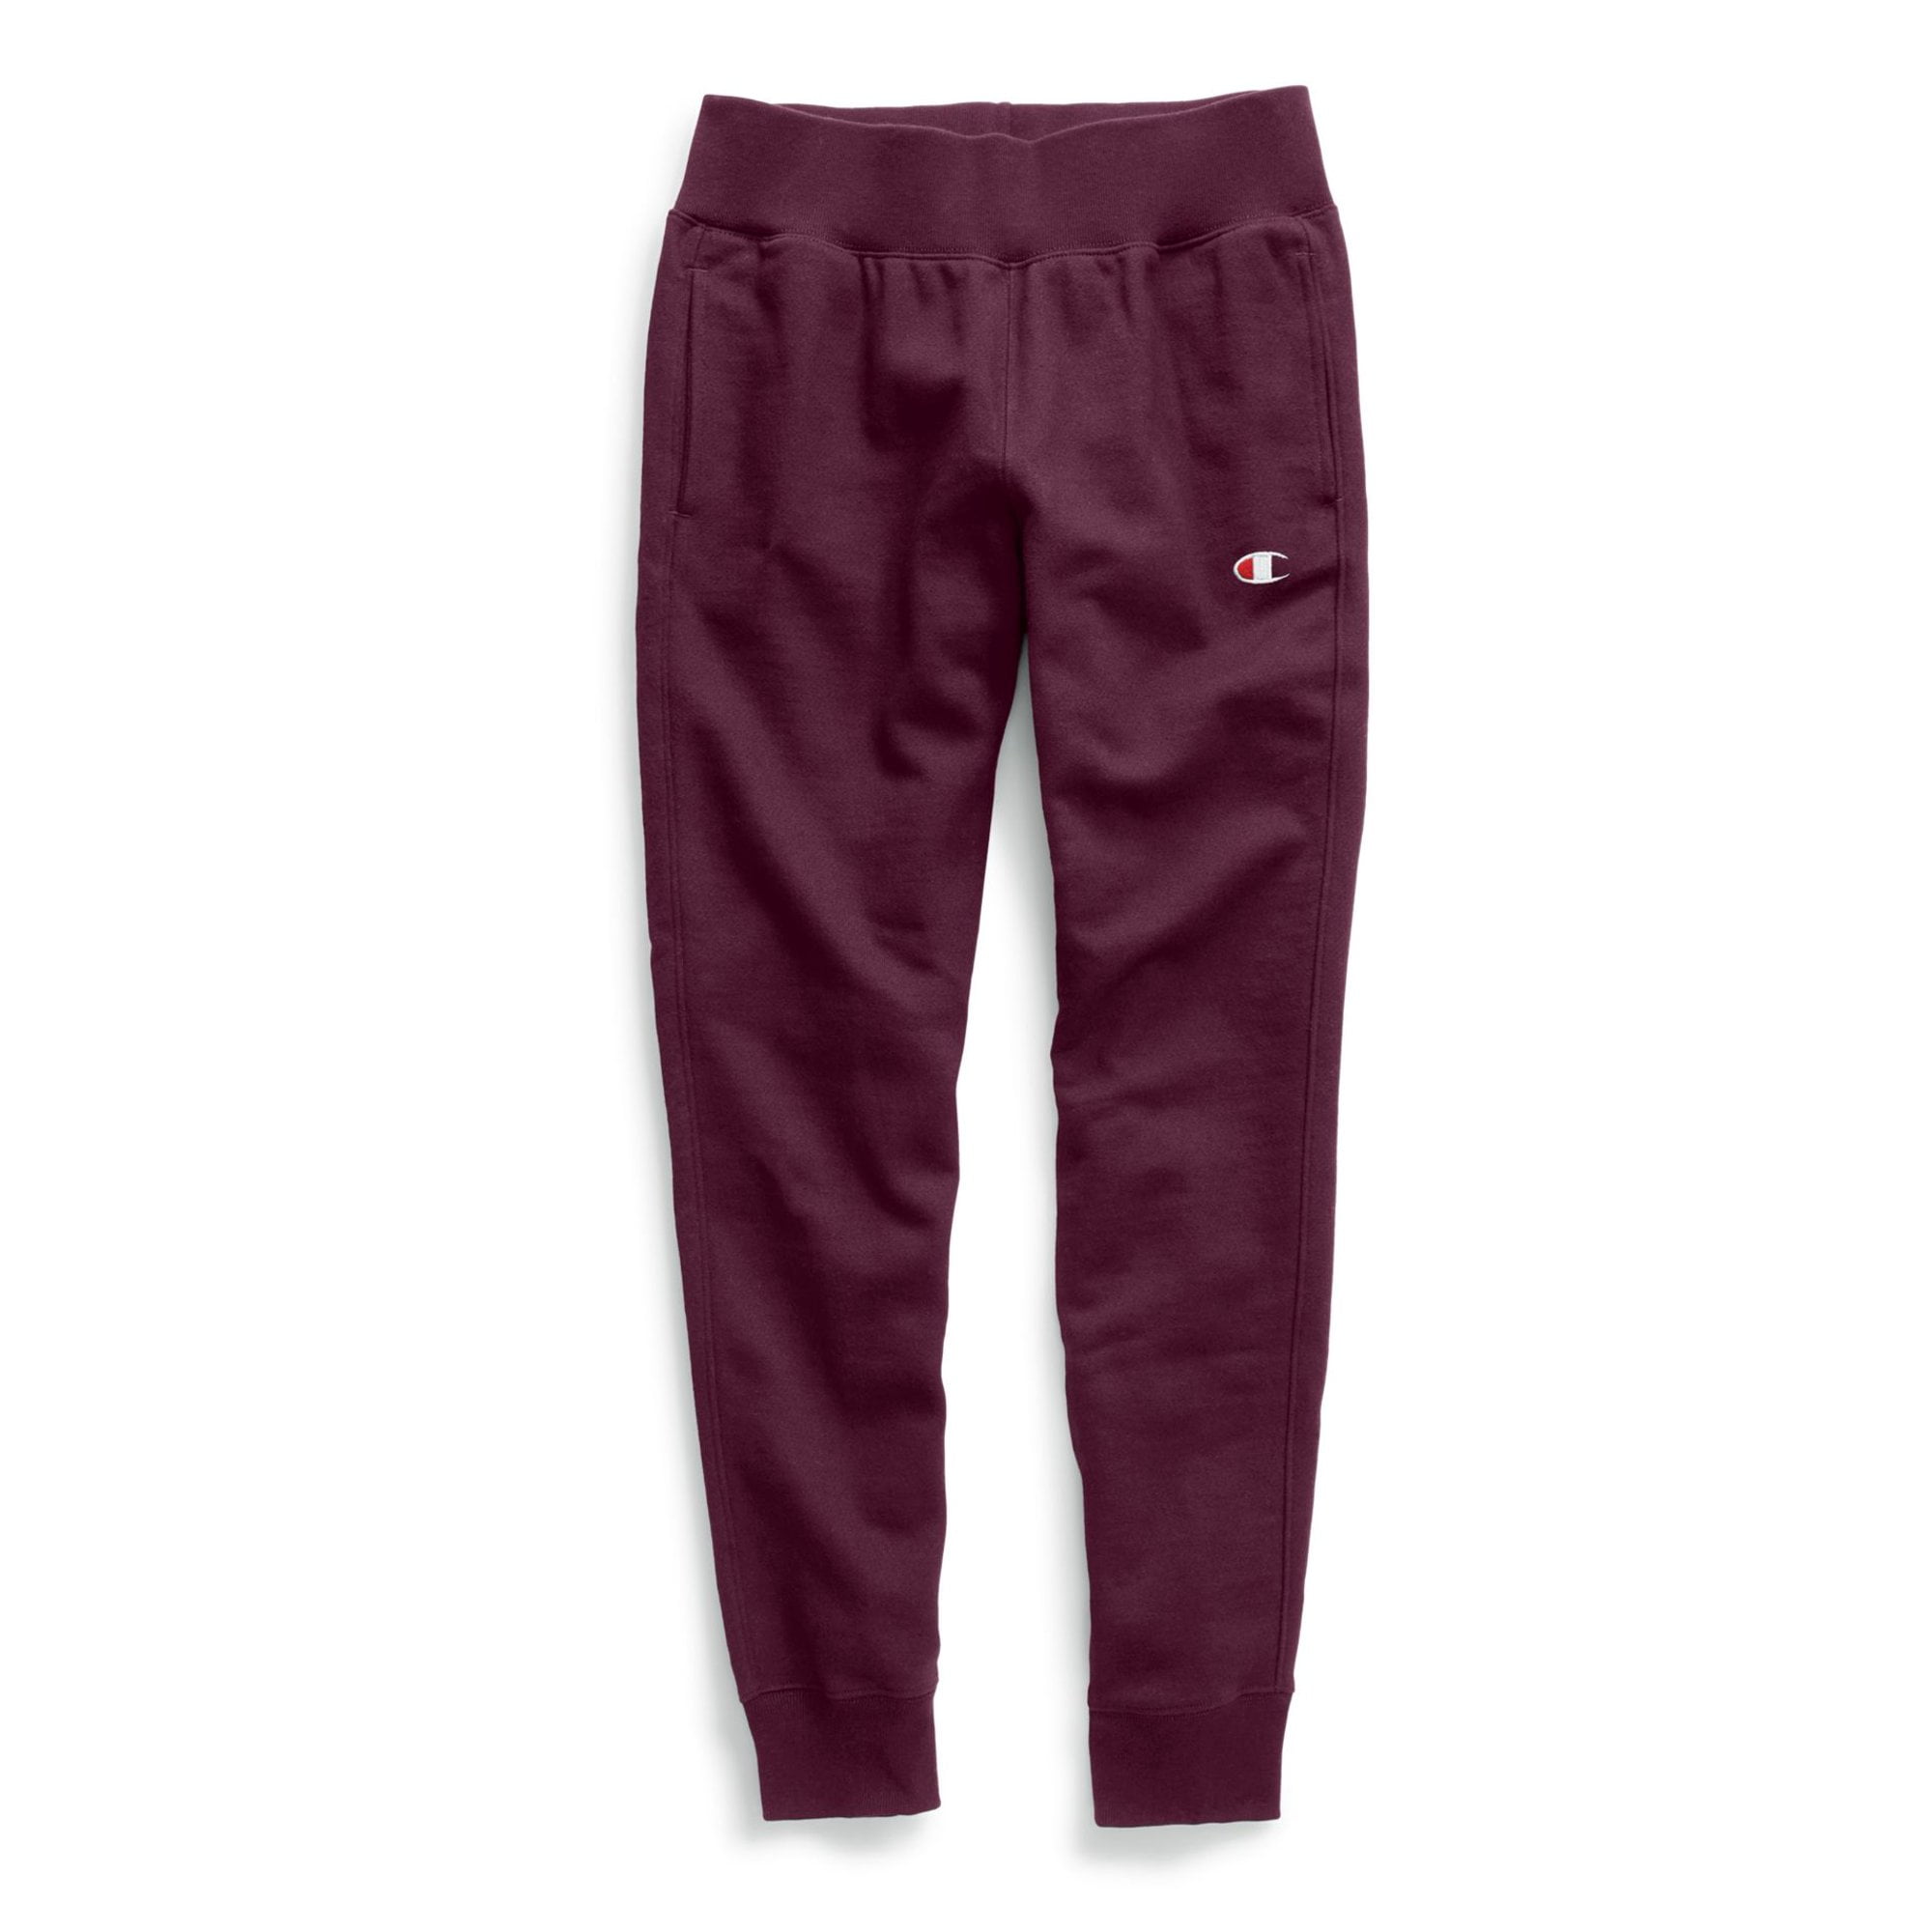 Champion LIFE Women's Reverse Weave Jogger Ladies Sweatpants - Choose Color  and Size (Imperial Indigo/Chainstitch Script, X-Small) 